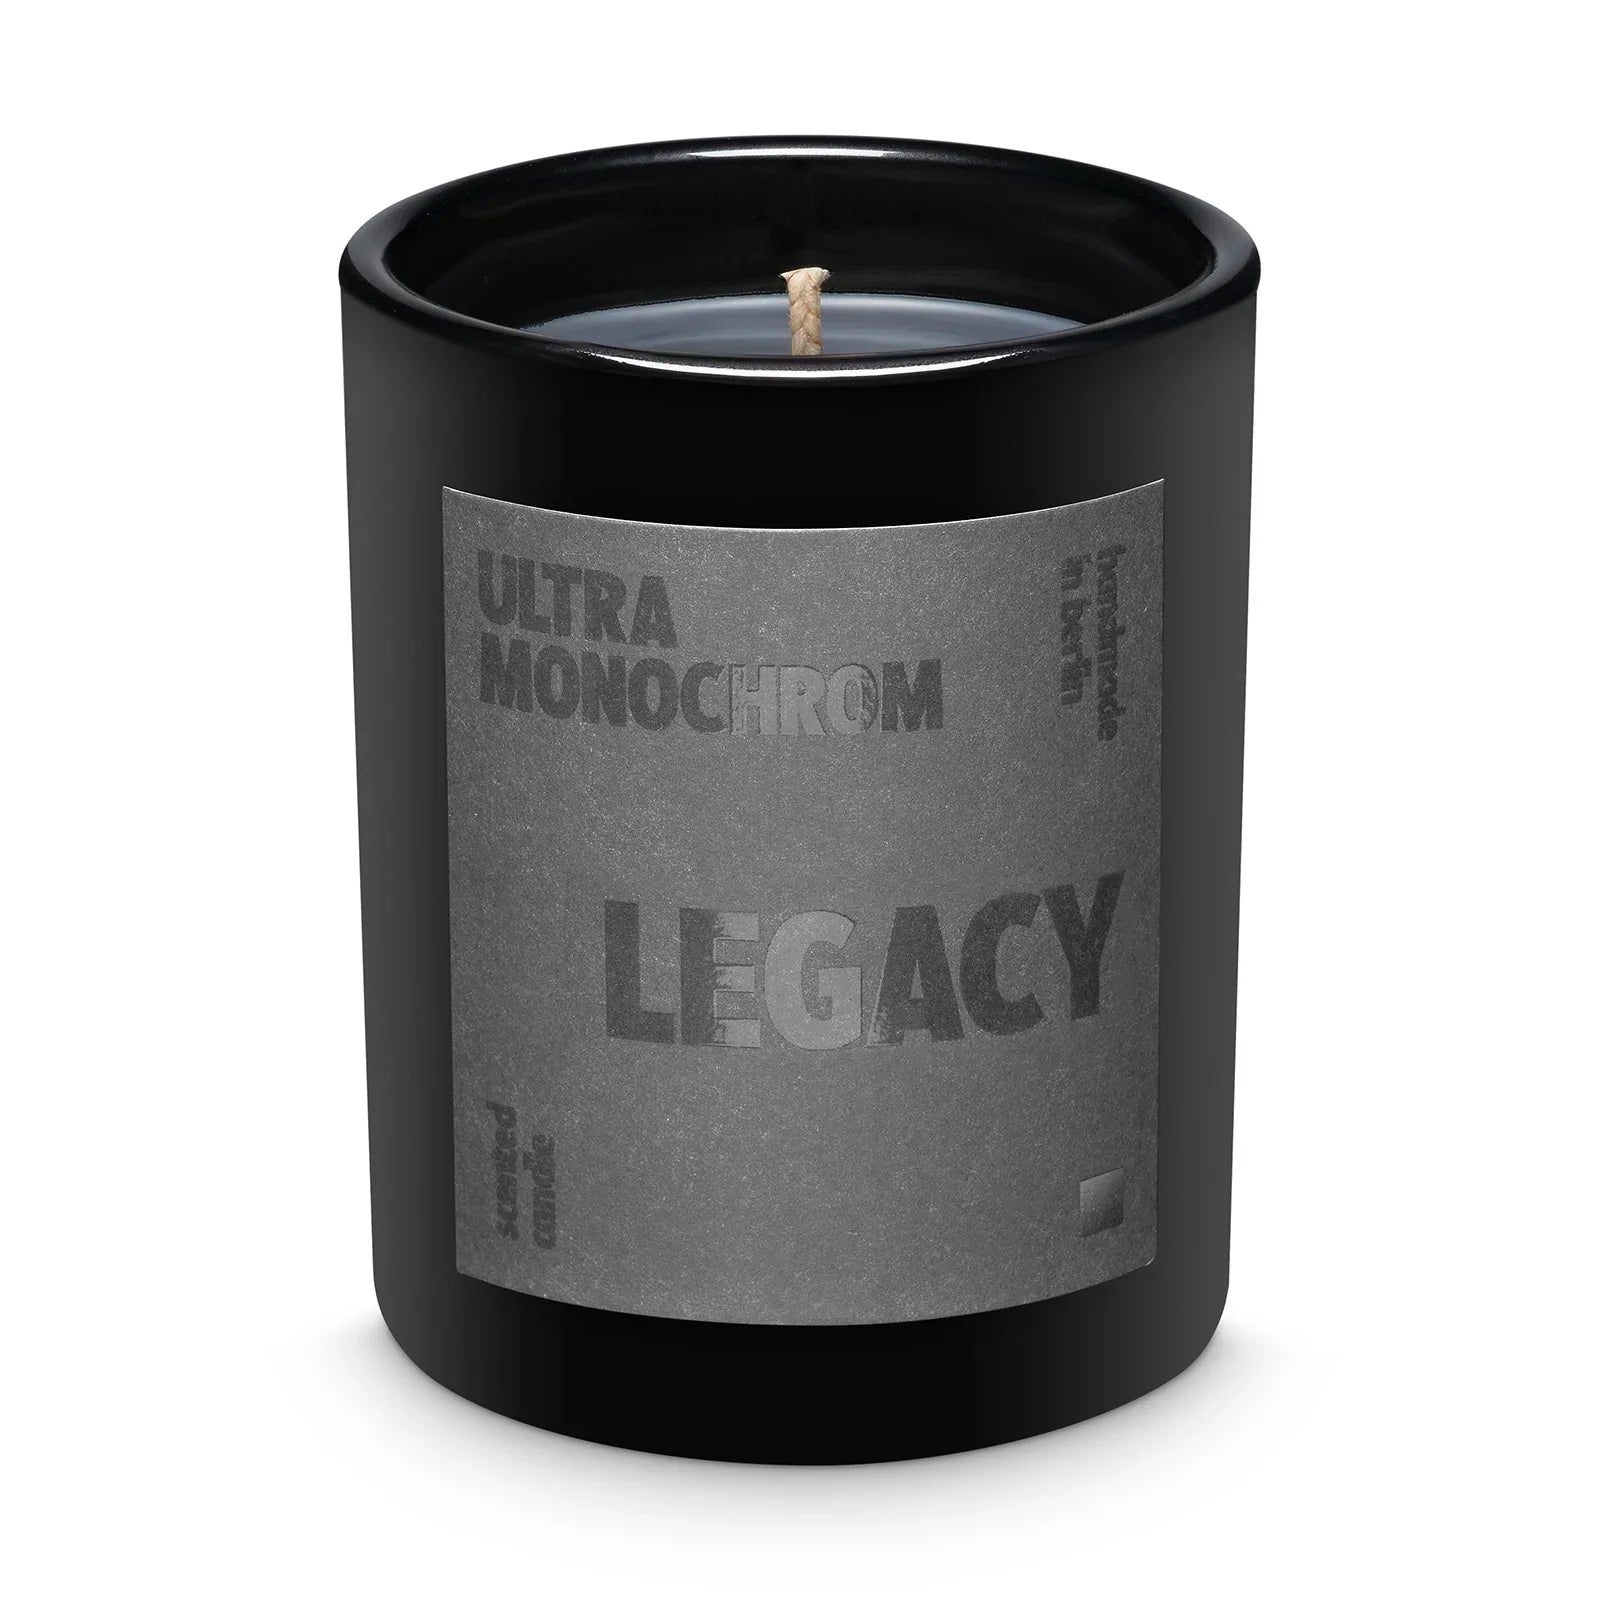 Ultramonochrom legacy scented soy candle.